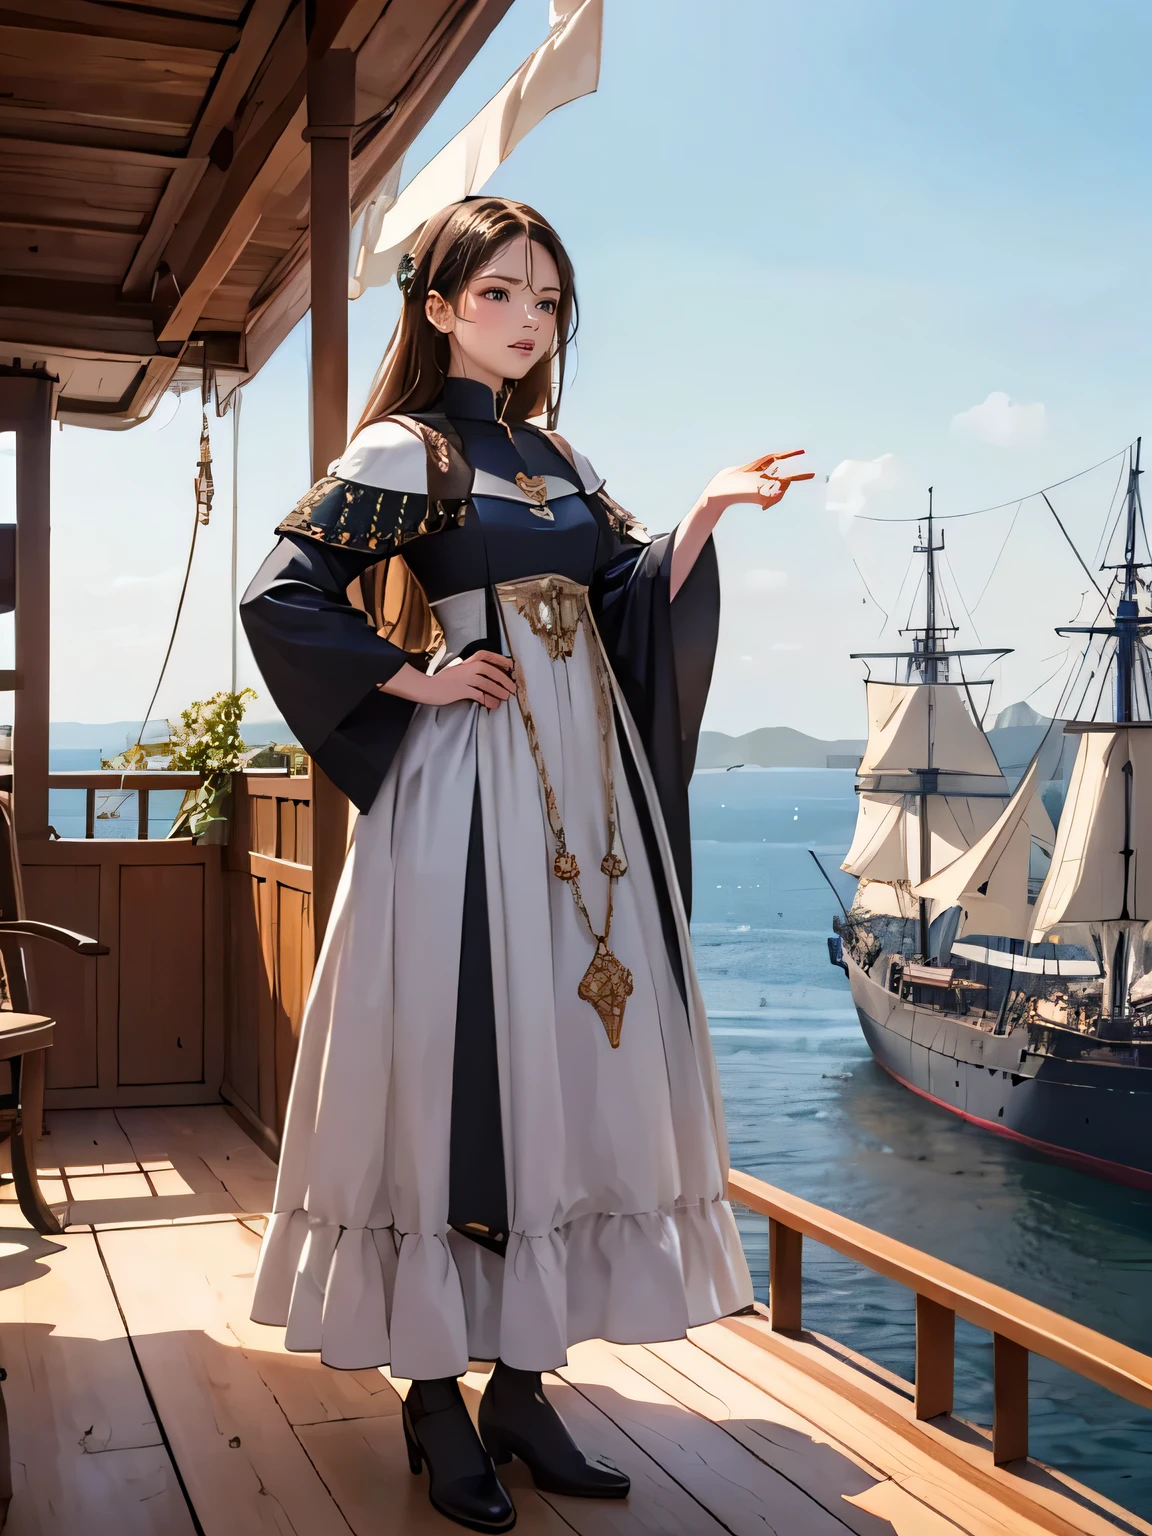 medieval European aristocratic dress, on the deck of a ship during the Age of Discovery in the Middle Ages,